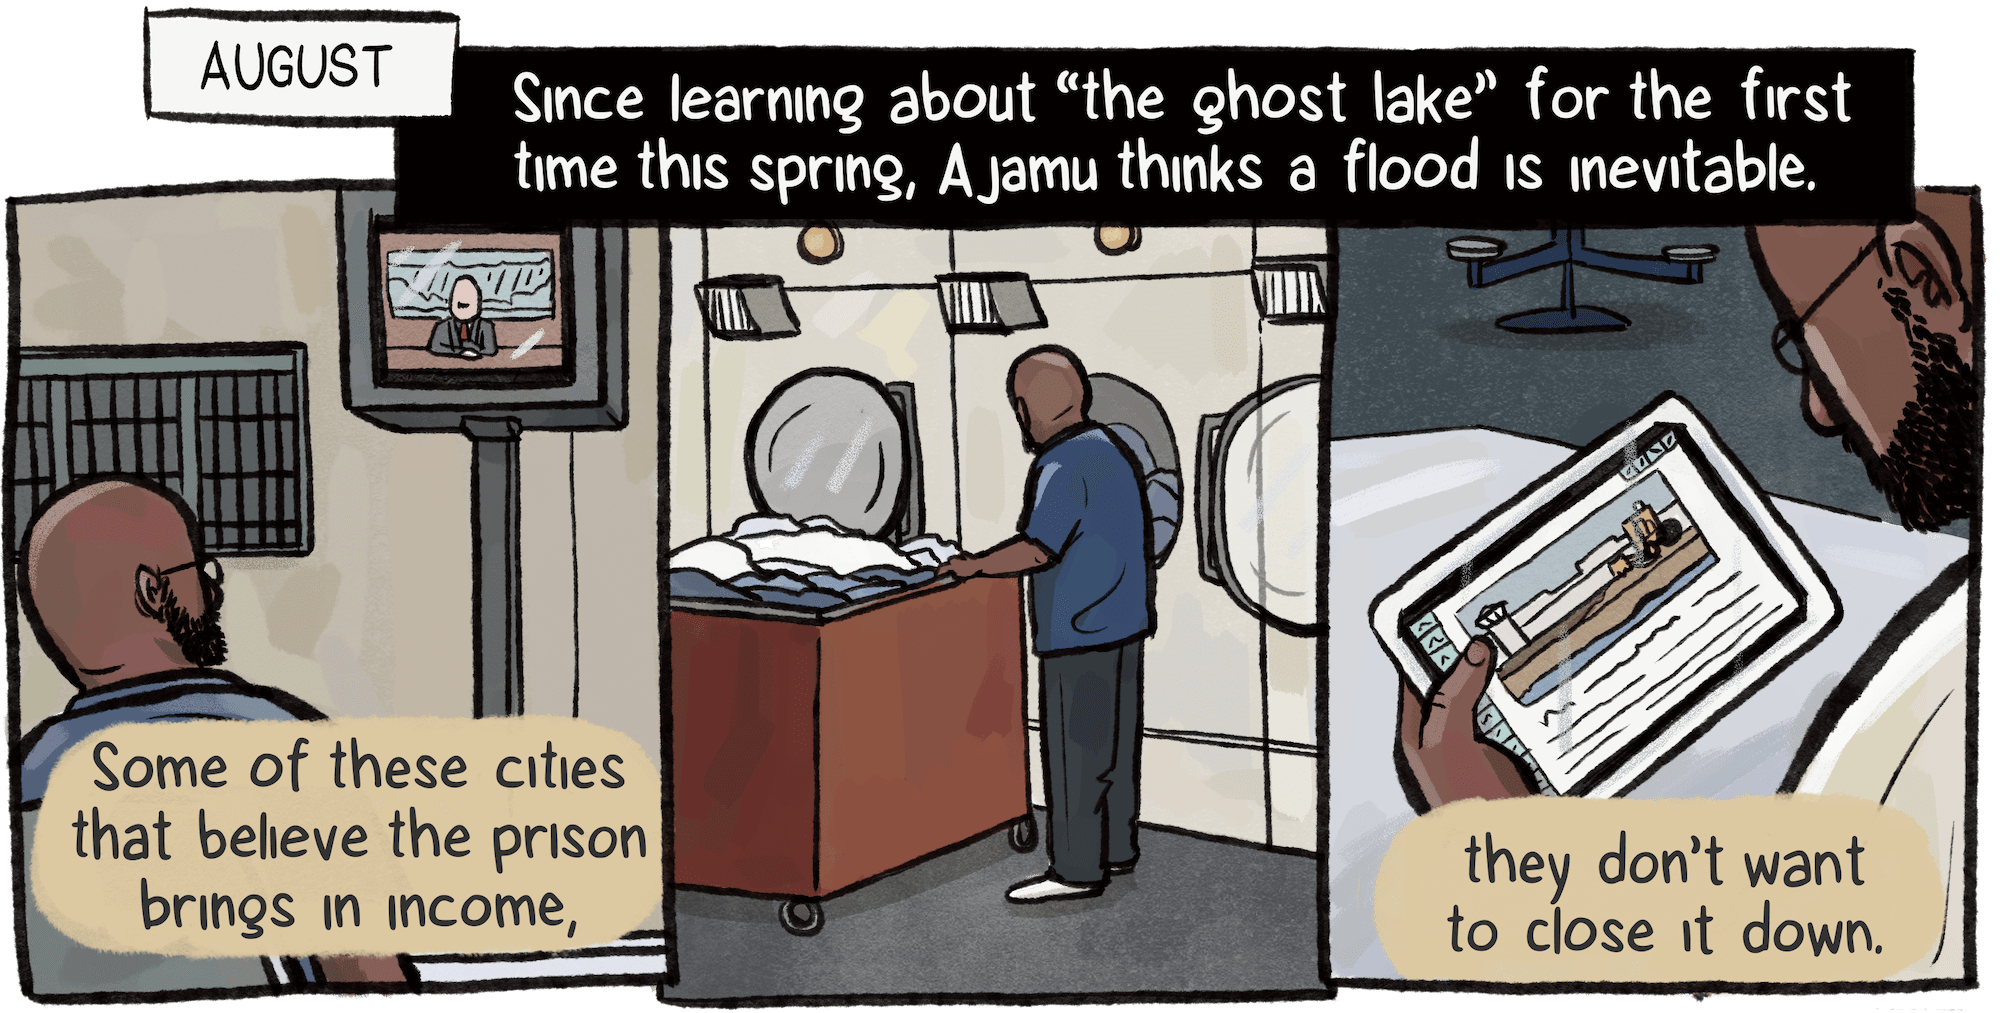 Scenes of Ajamu in a room with a wall-mounted TV, a laundry room and him reading news on a tablet. Ajamu thinks a flood is inevitable, but cities won’t close down the prisons because they bring income.